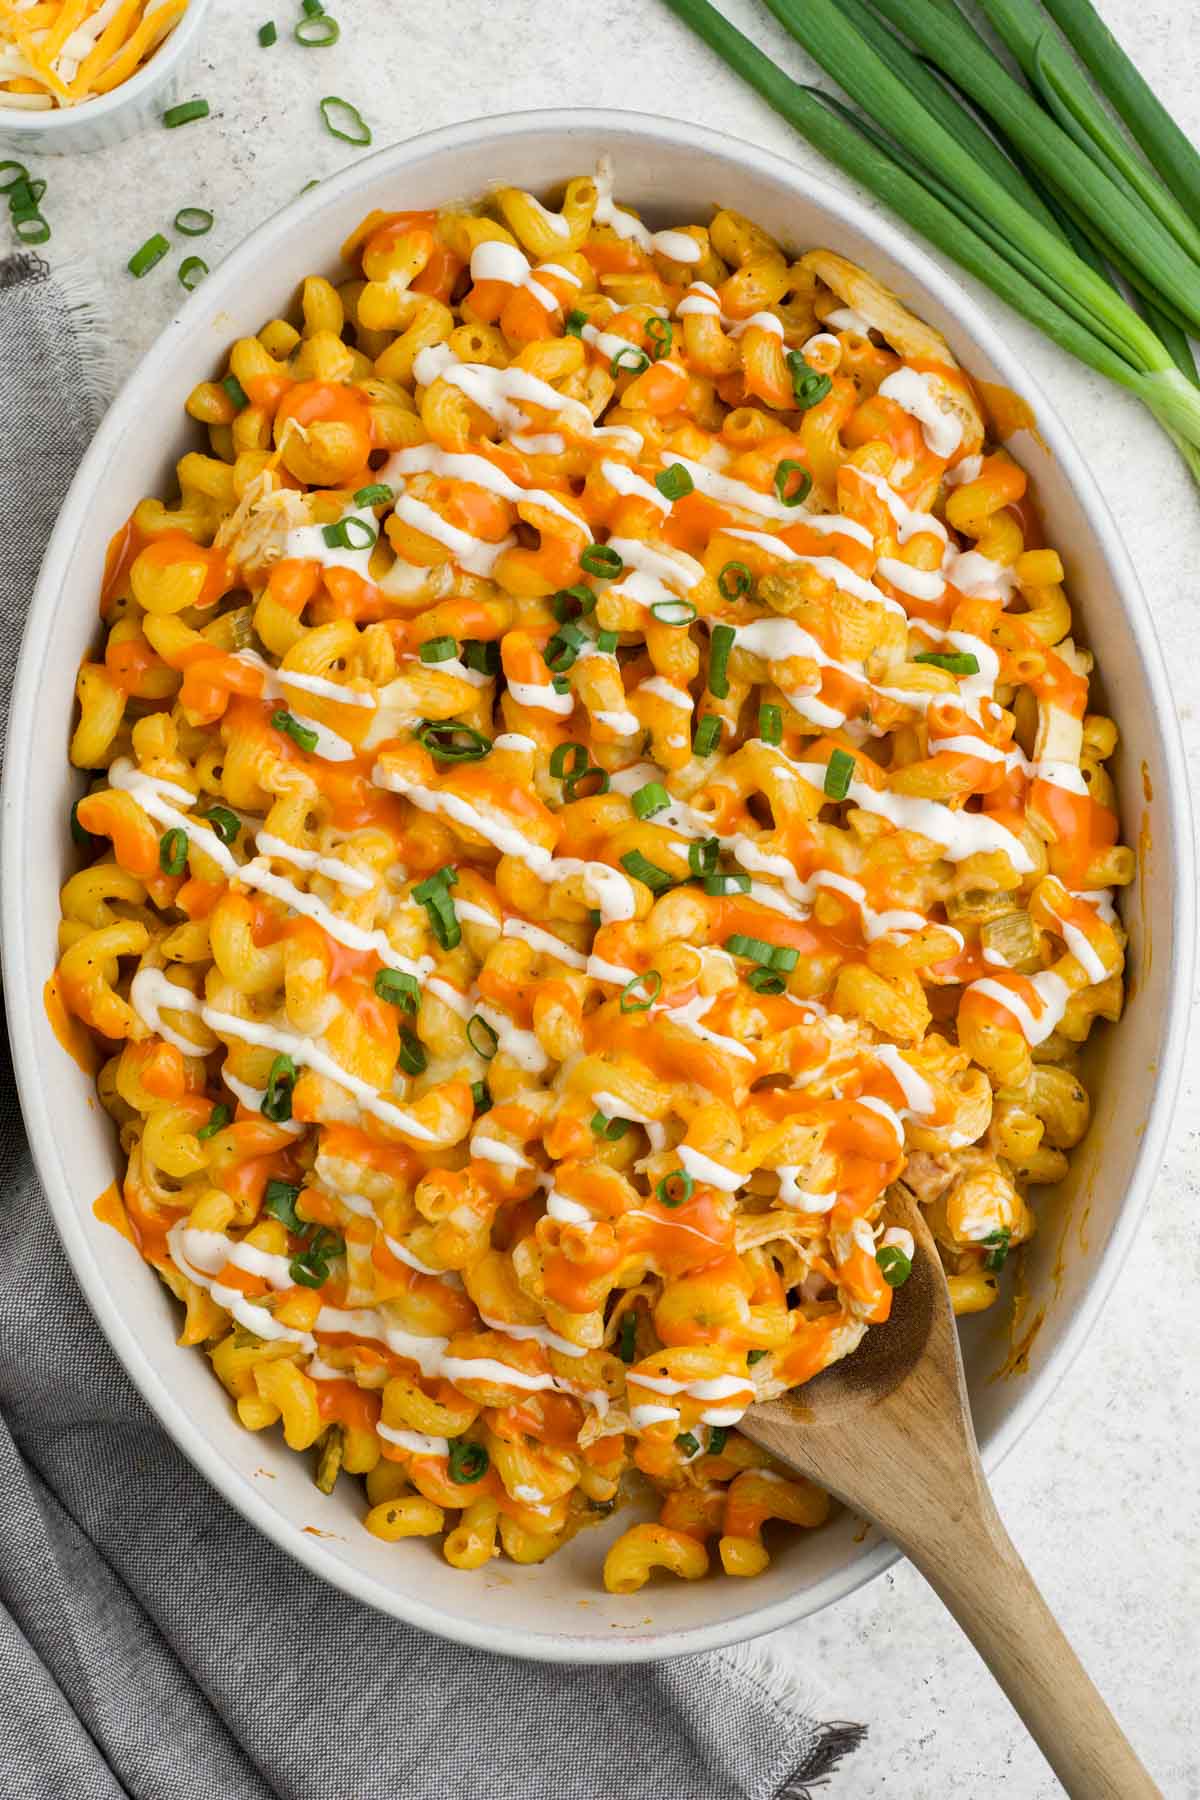 Baking dish with pasta, buffalo cheese sauce and chicken.